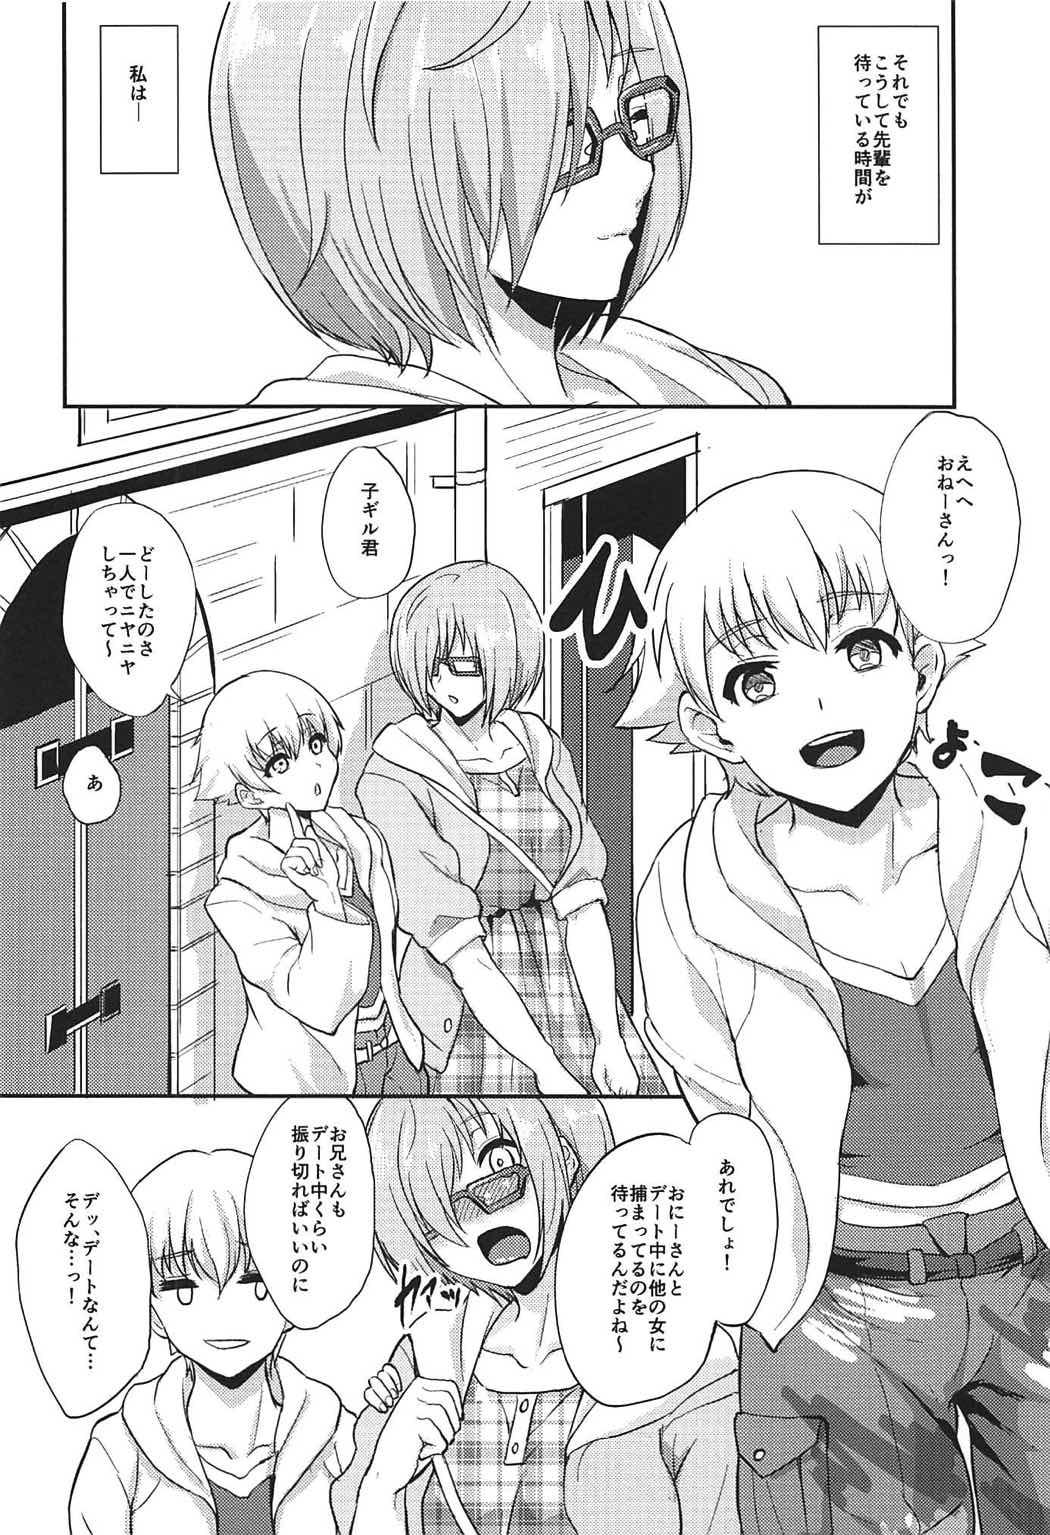 Amature Senpai Minaide... - Fate grand order Roleplay - Page 4